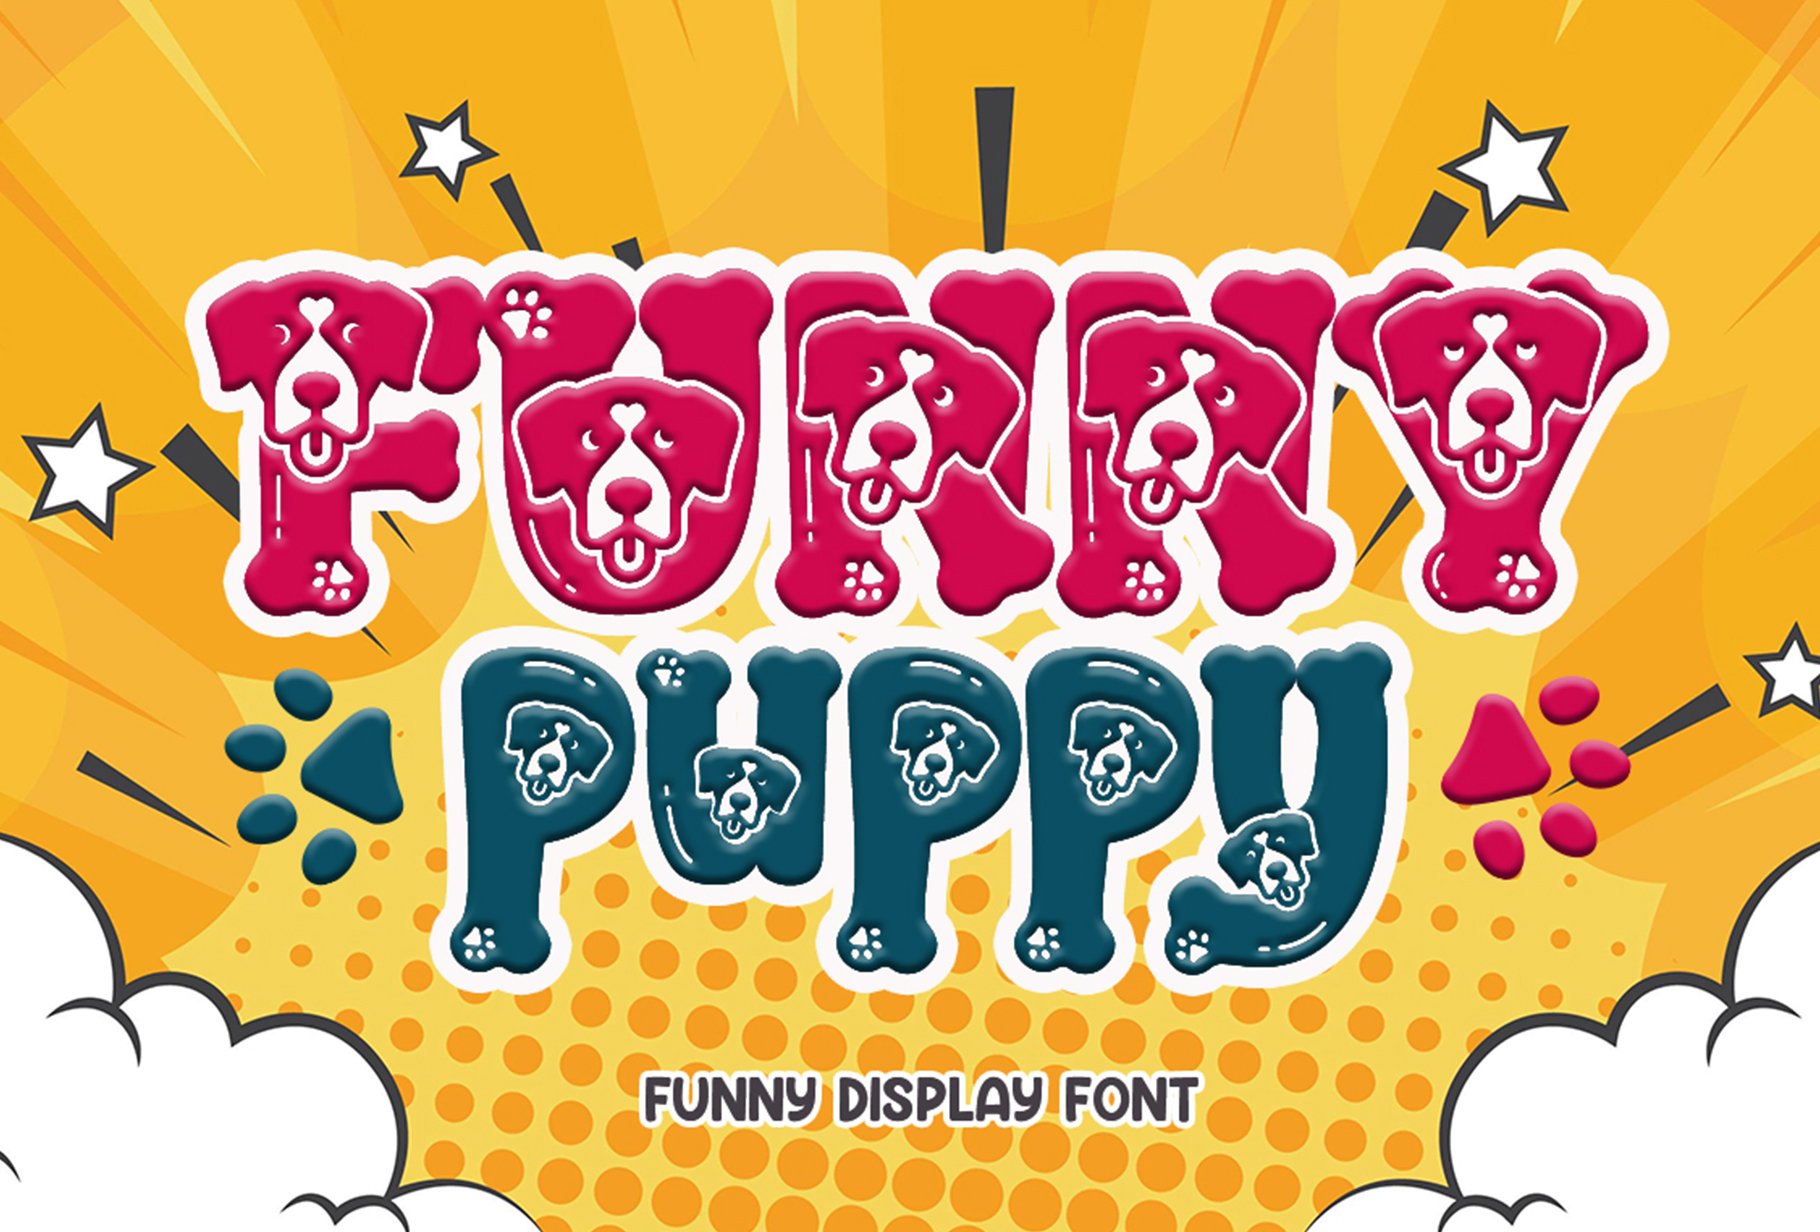 Funny Puppy | Funny Display Font cover image.